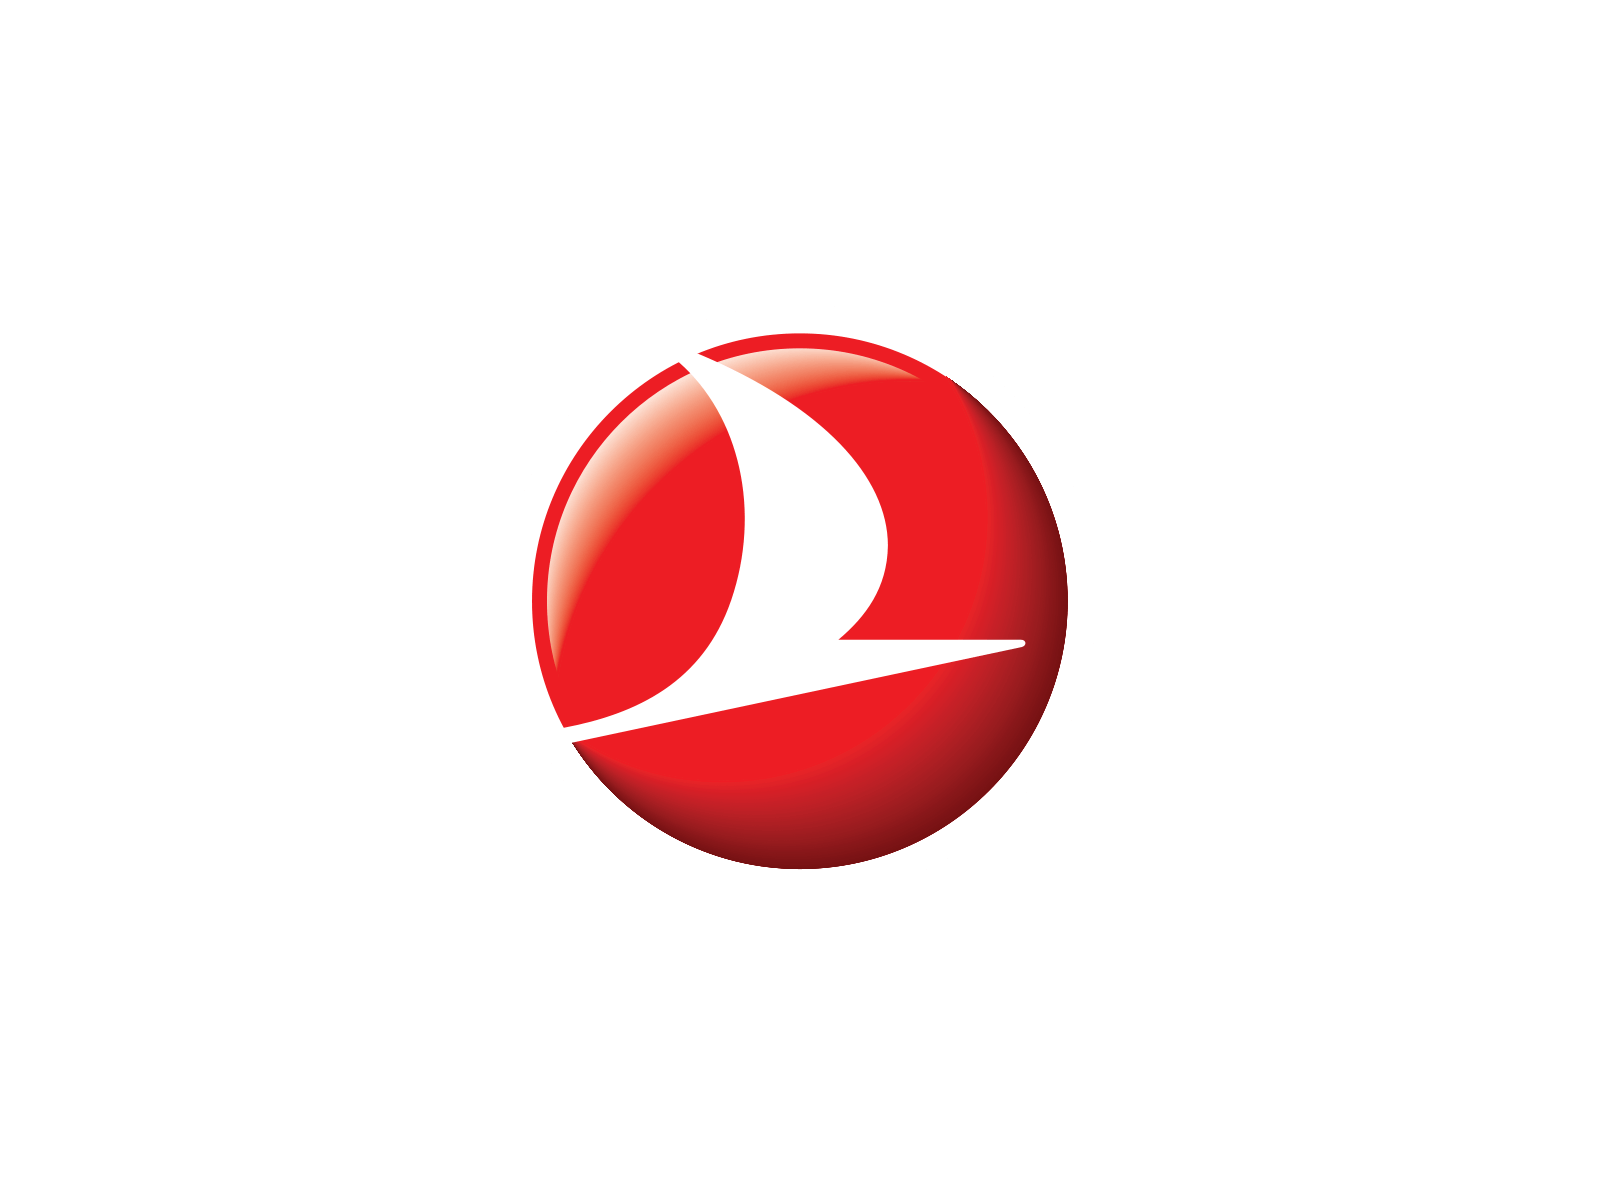 Red Airline Logo - Hainan Airlines logo